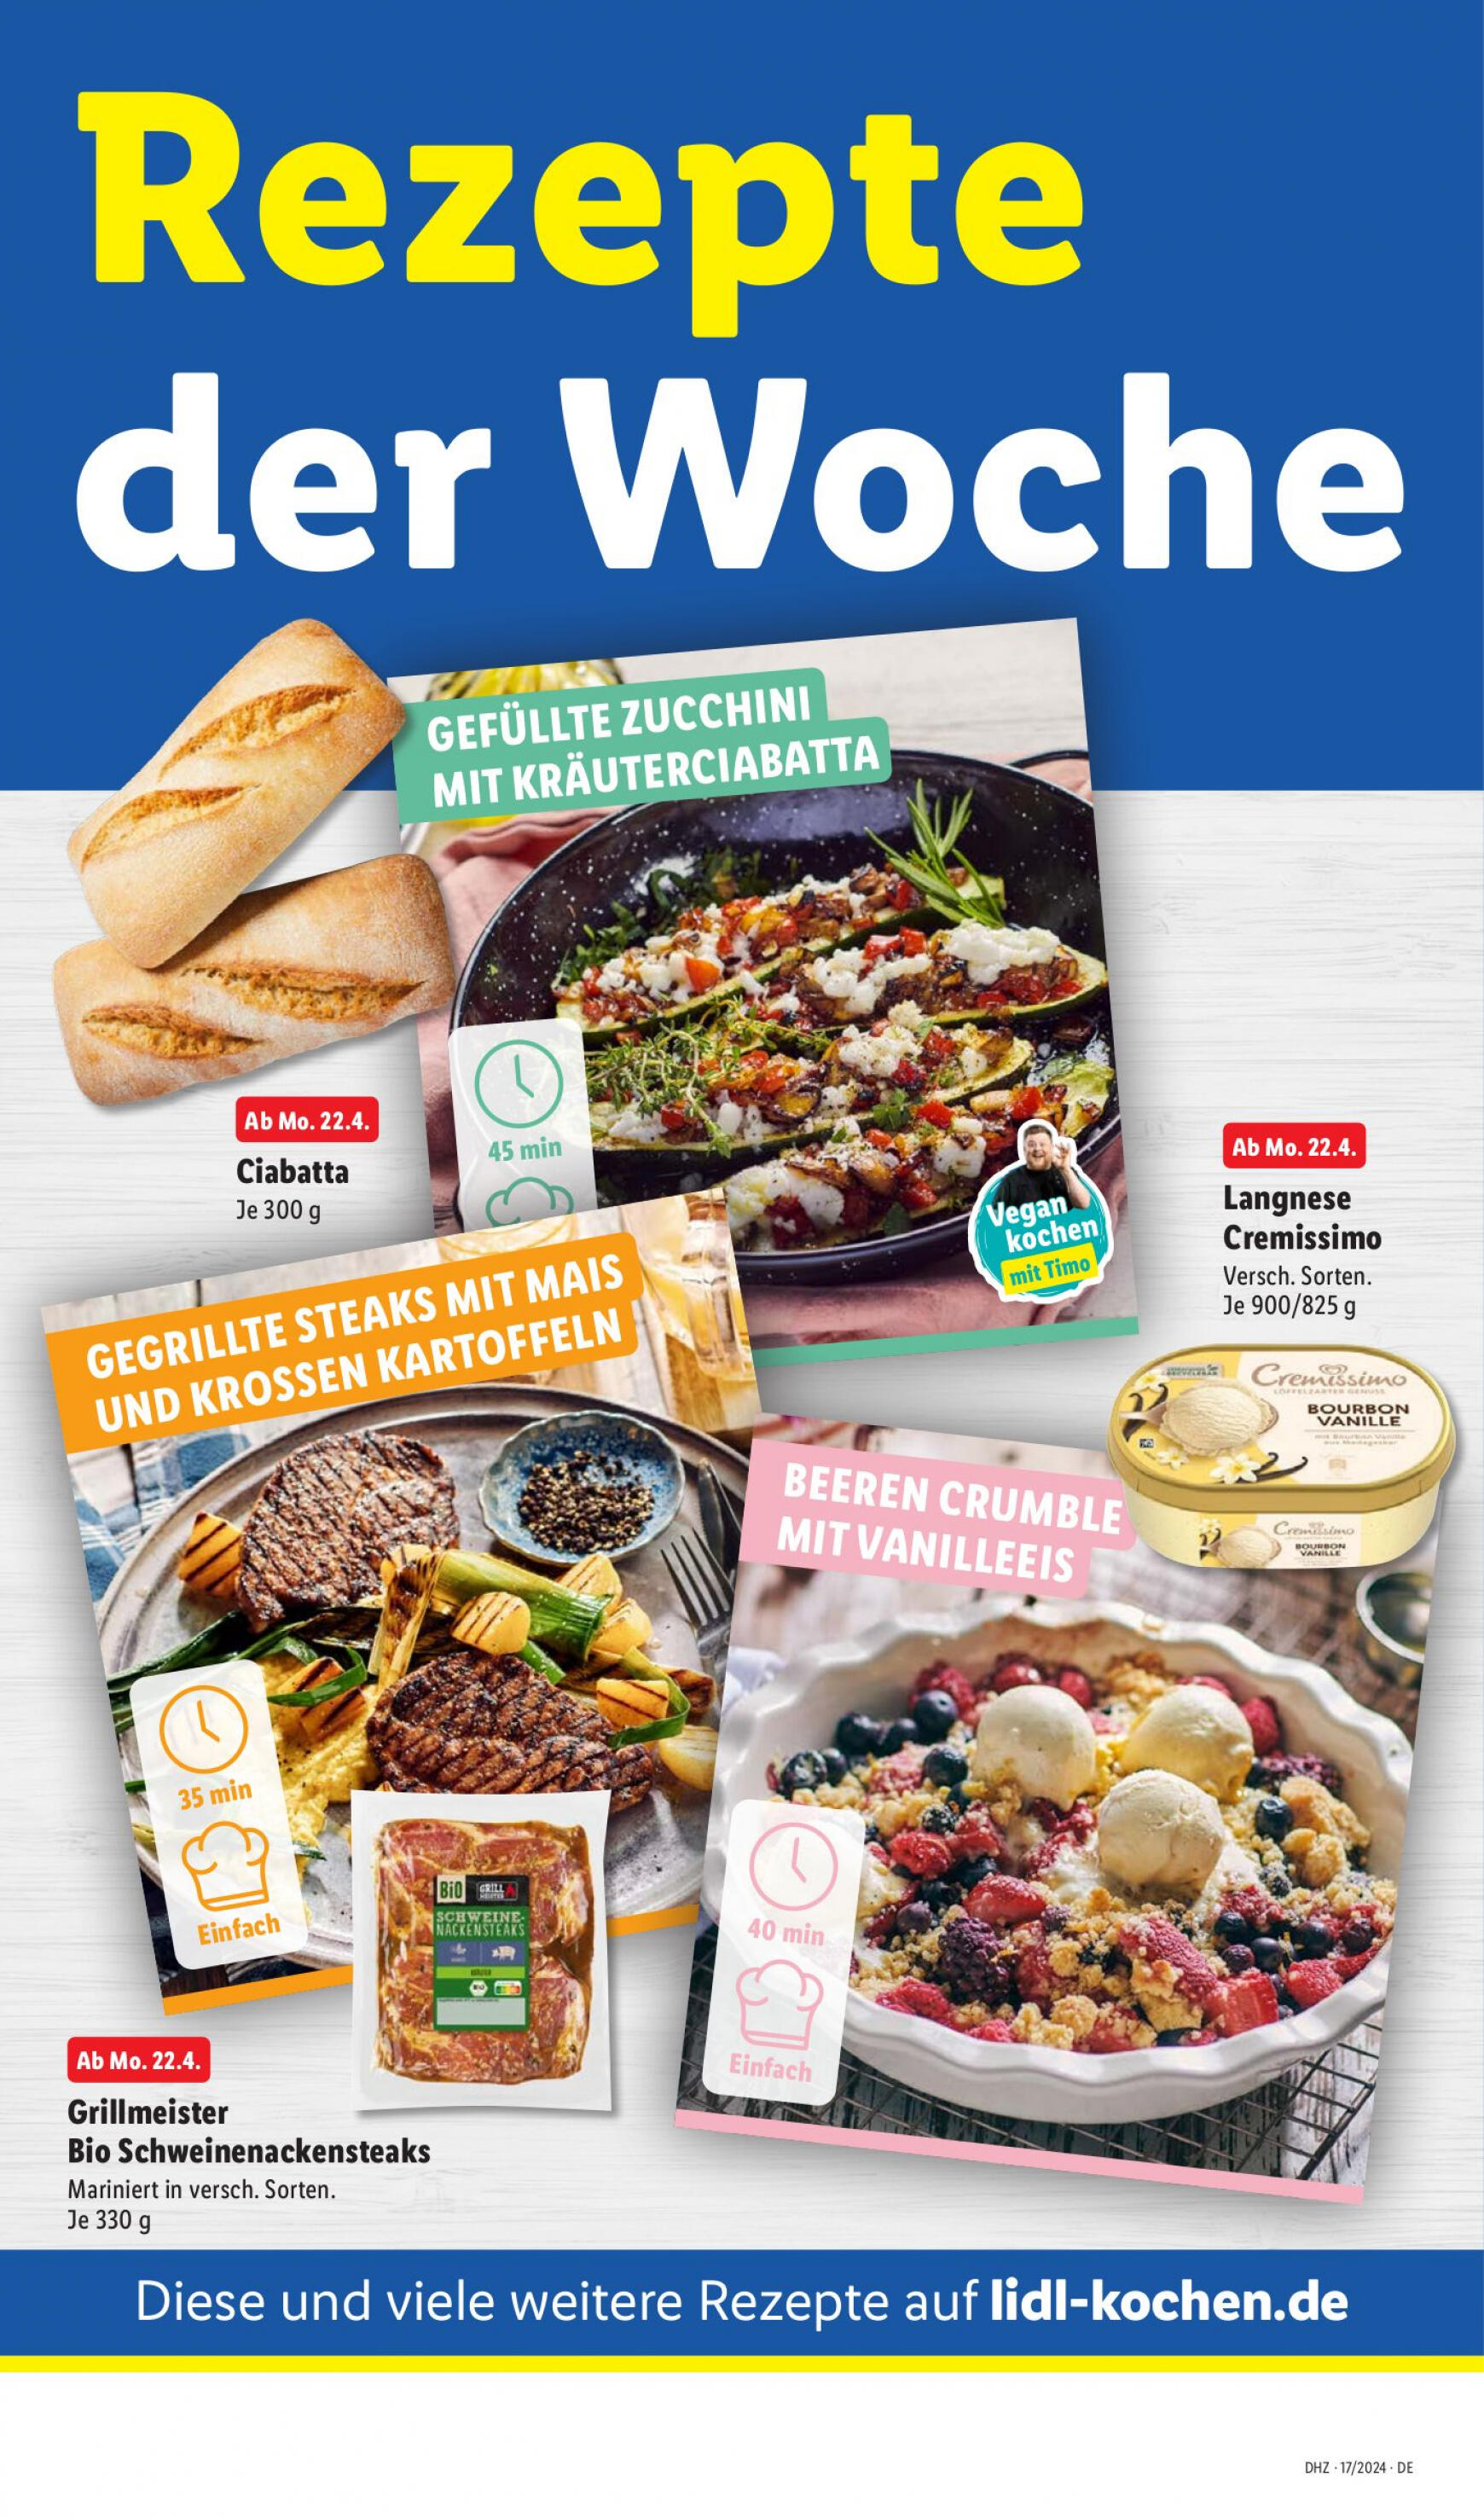 lidl - Flyer Lidl aktuell 22.04. - 27.04. - page: 6